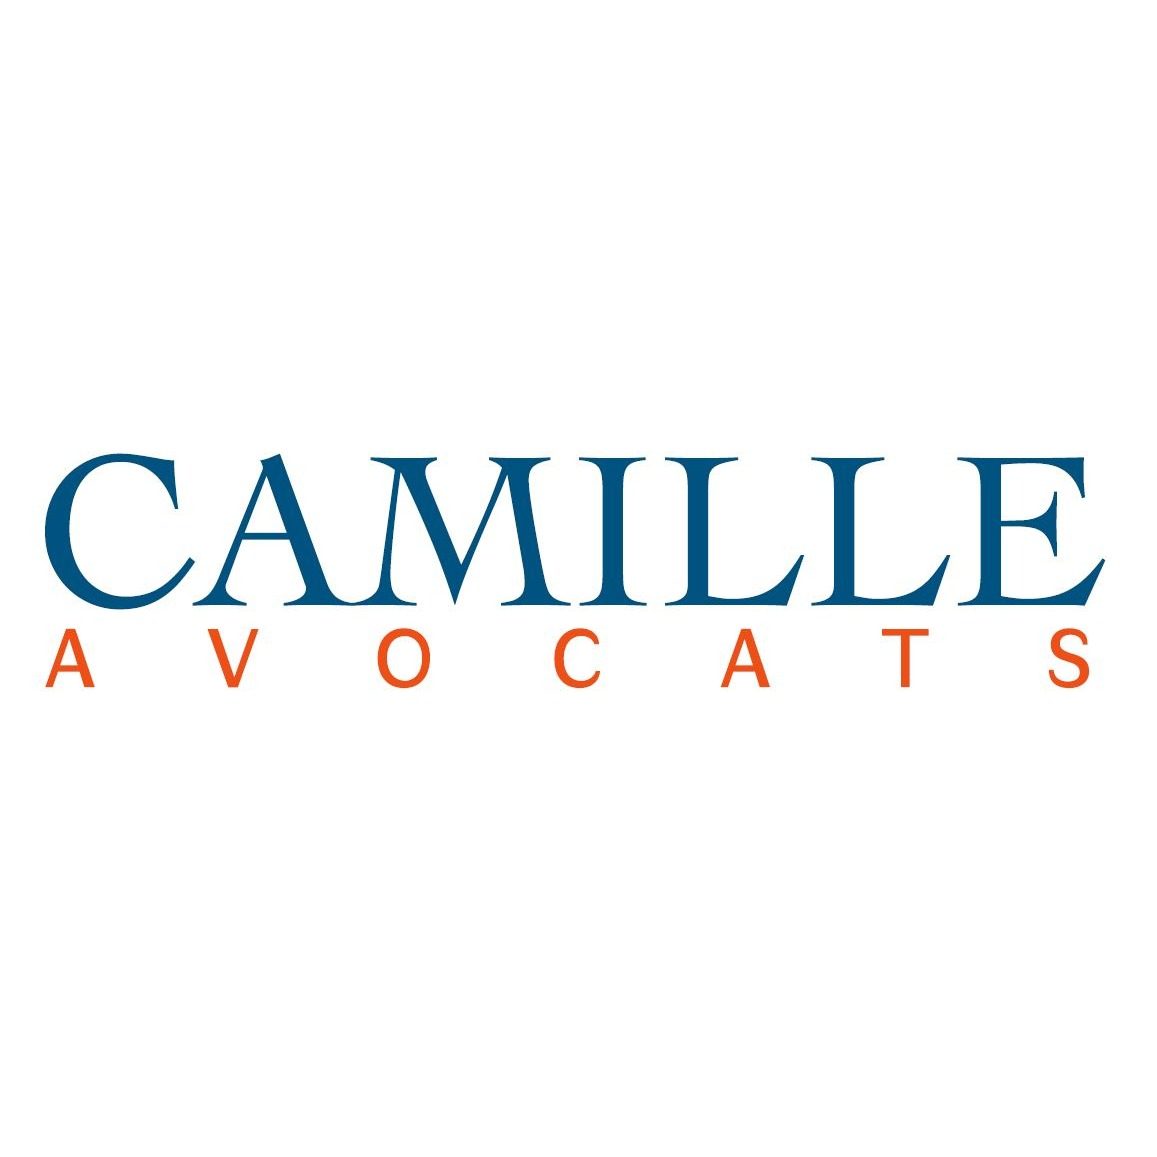 Camille Avocats